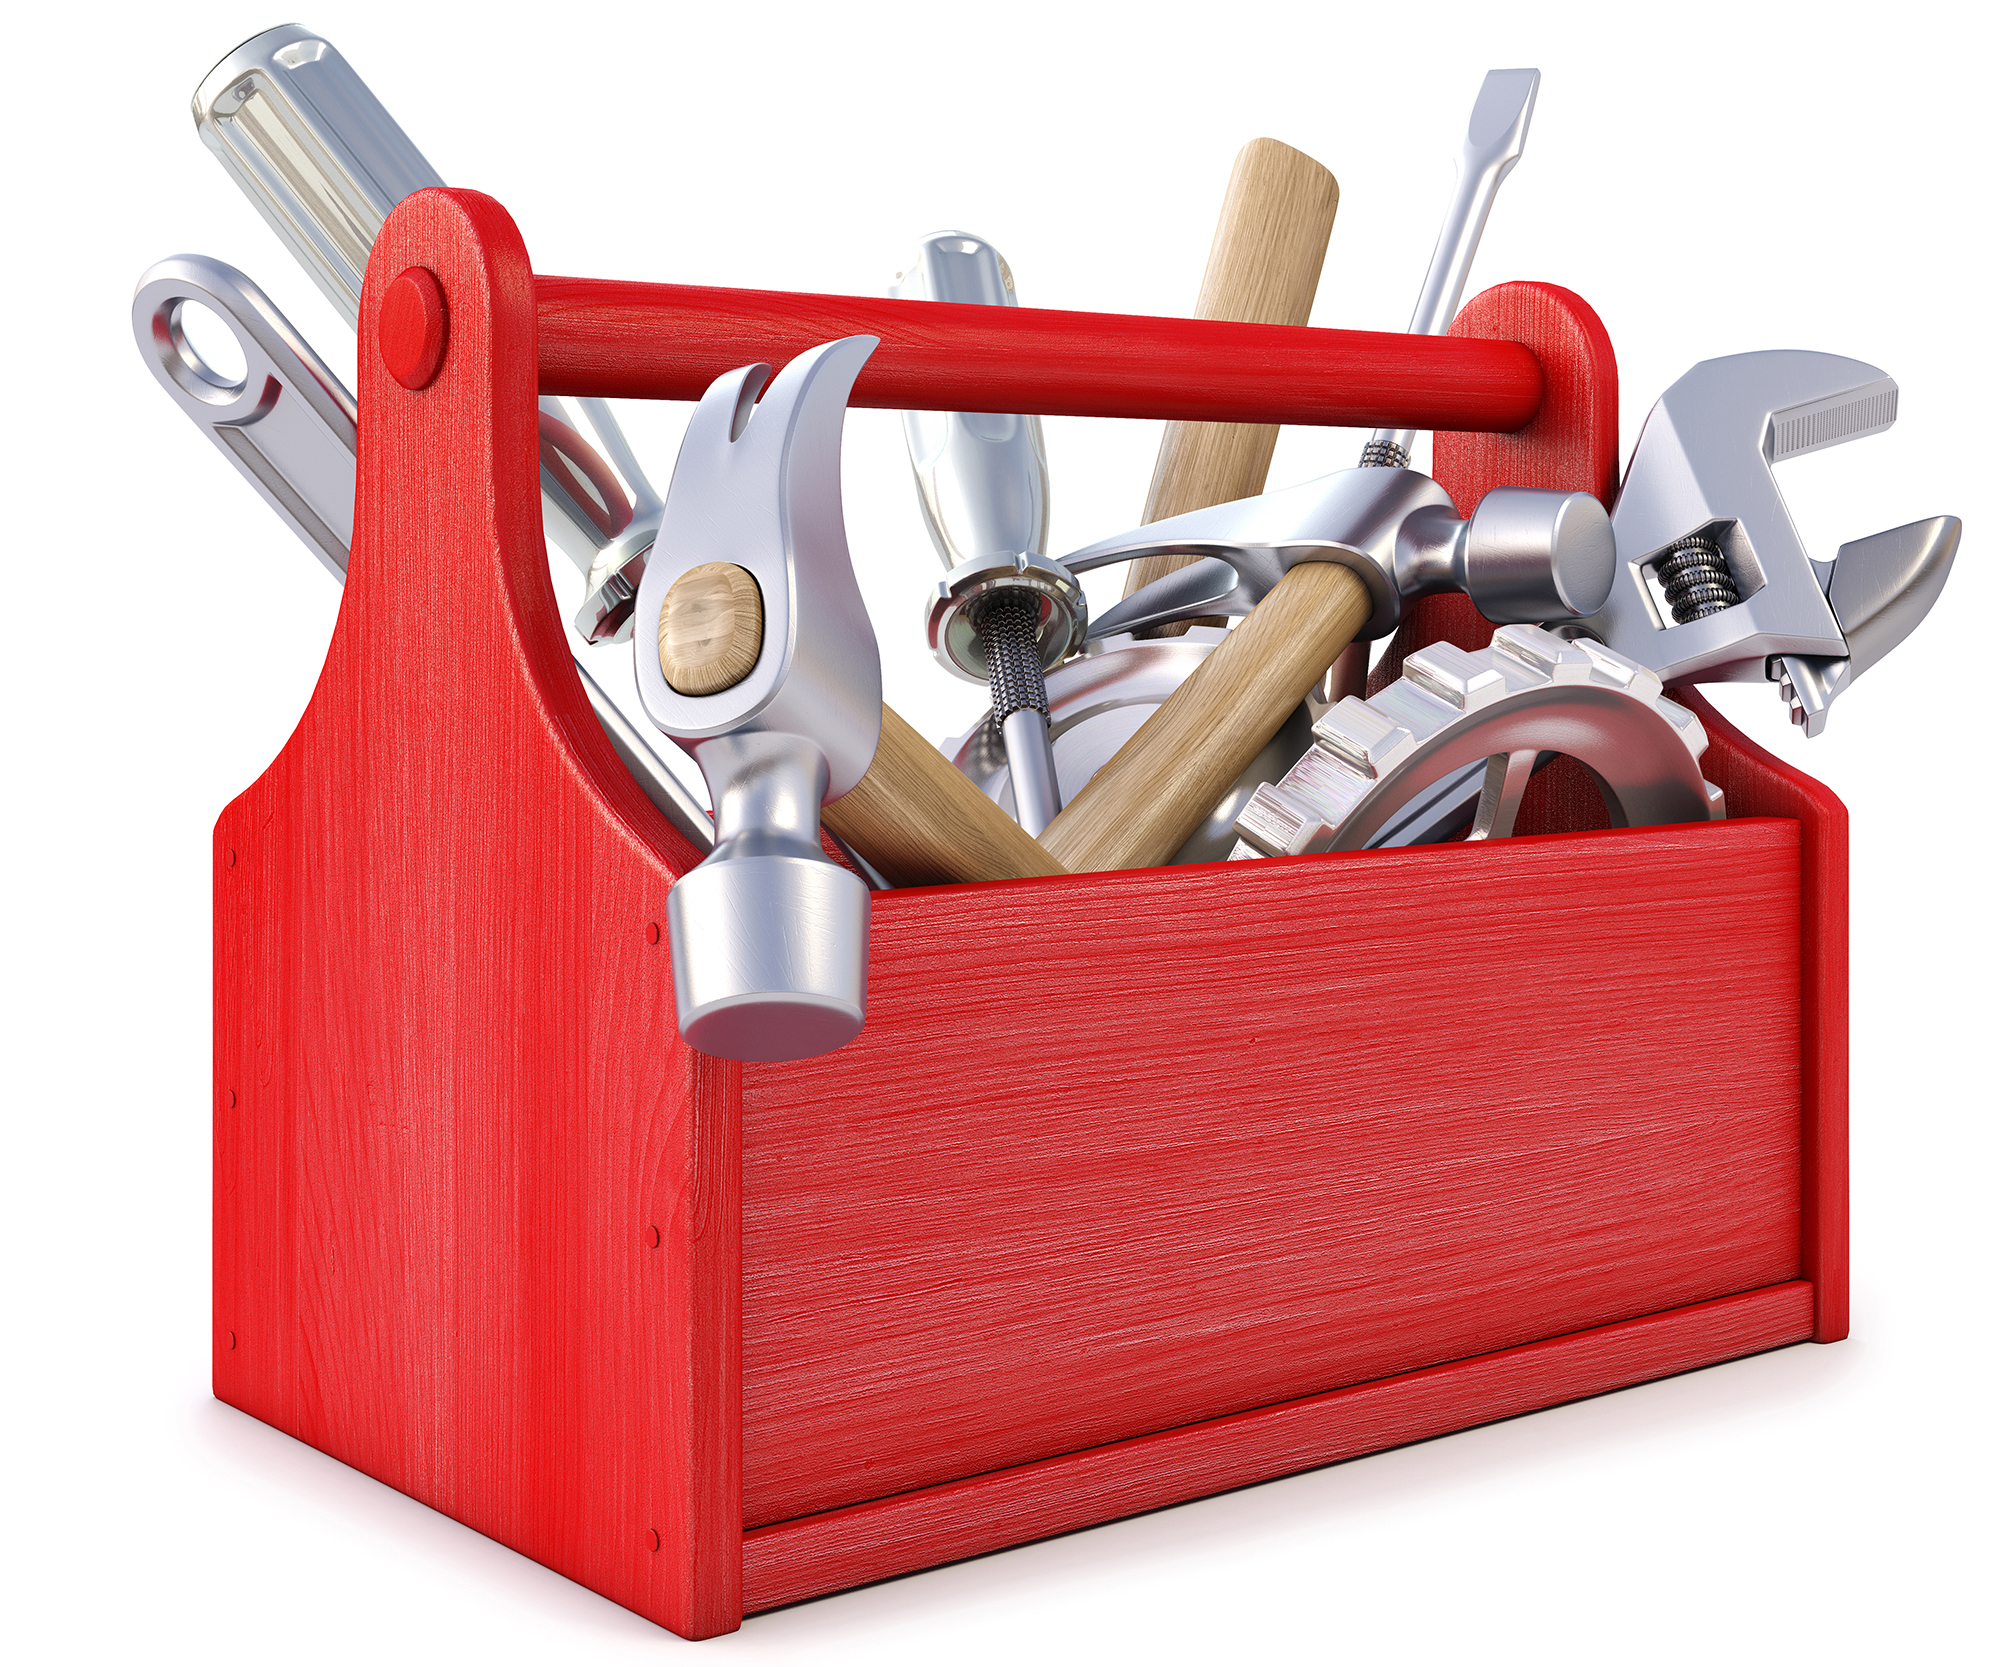 Toolbox (Stock Image)